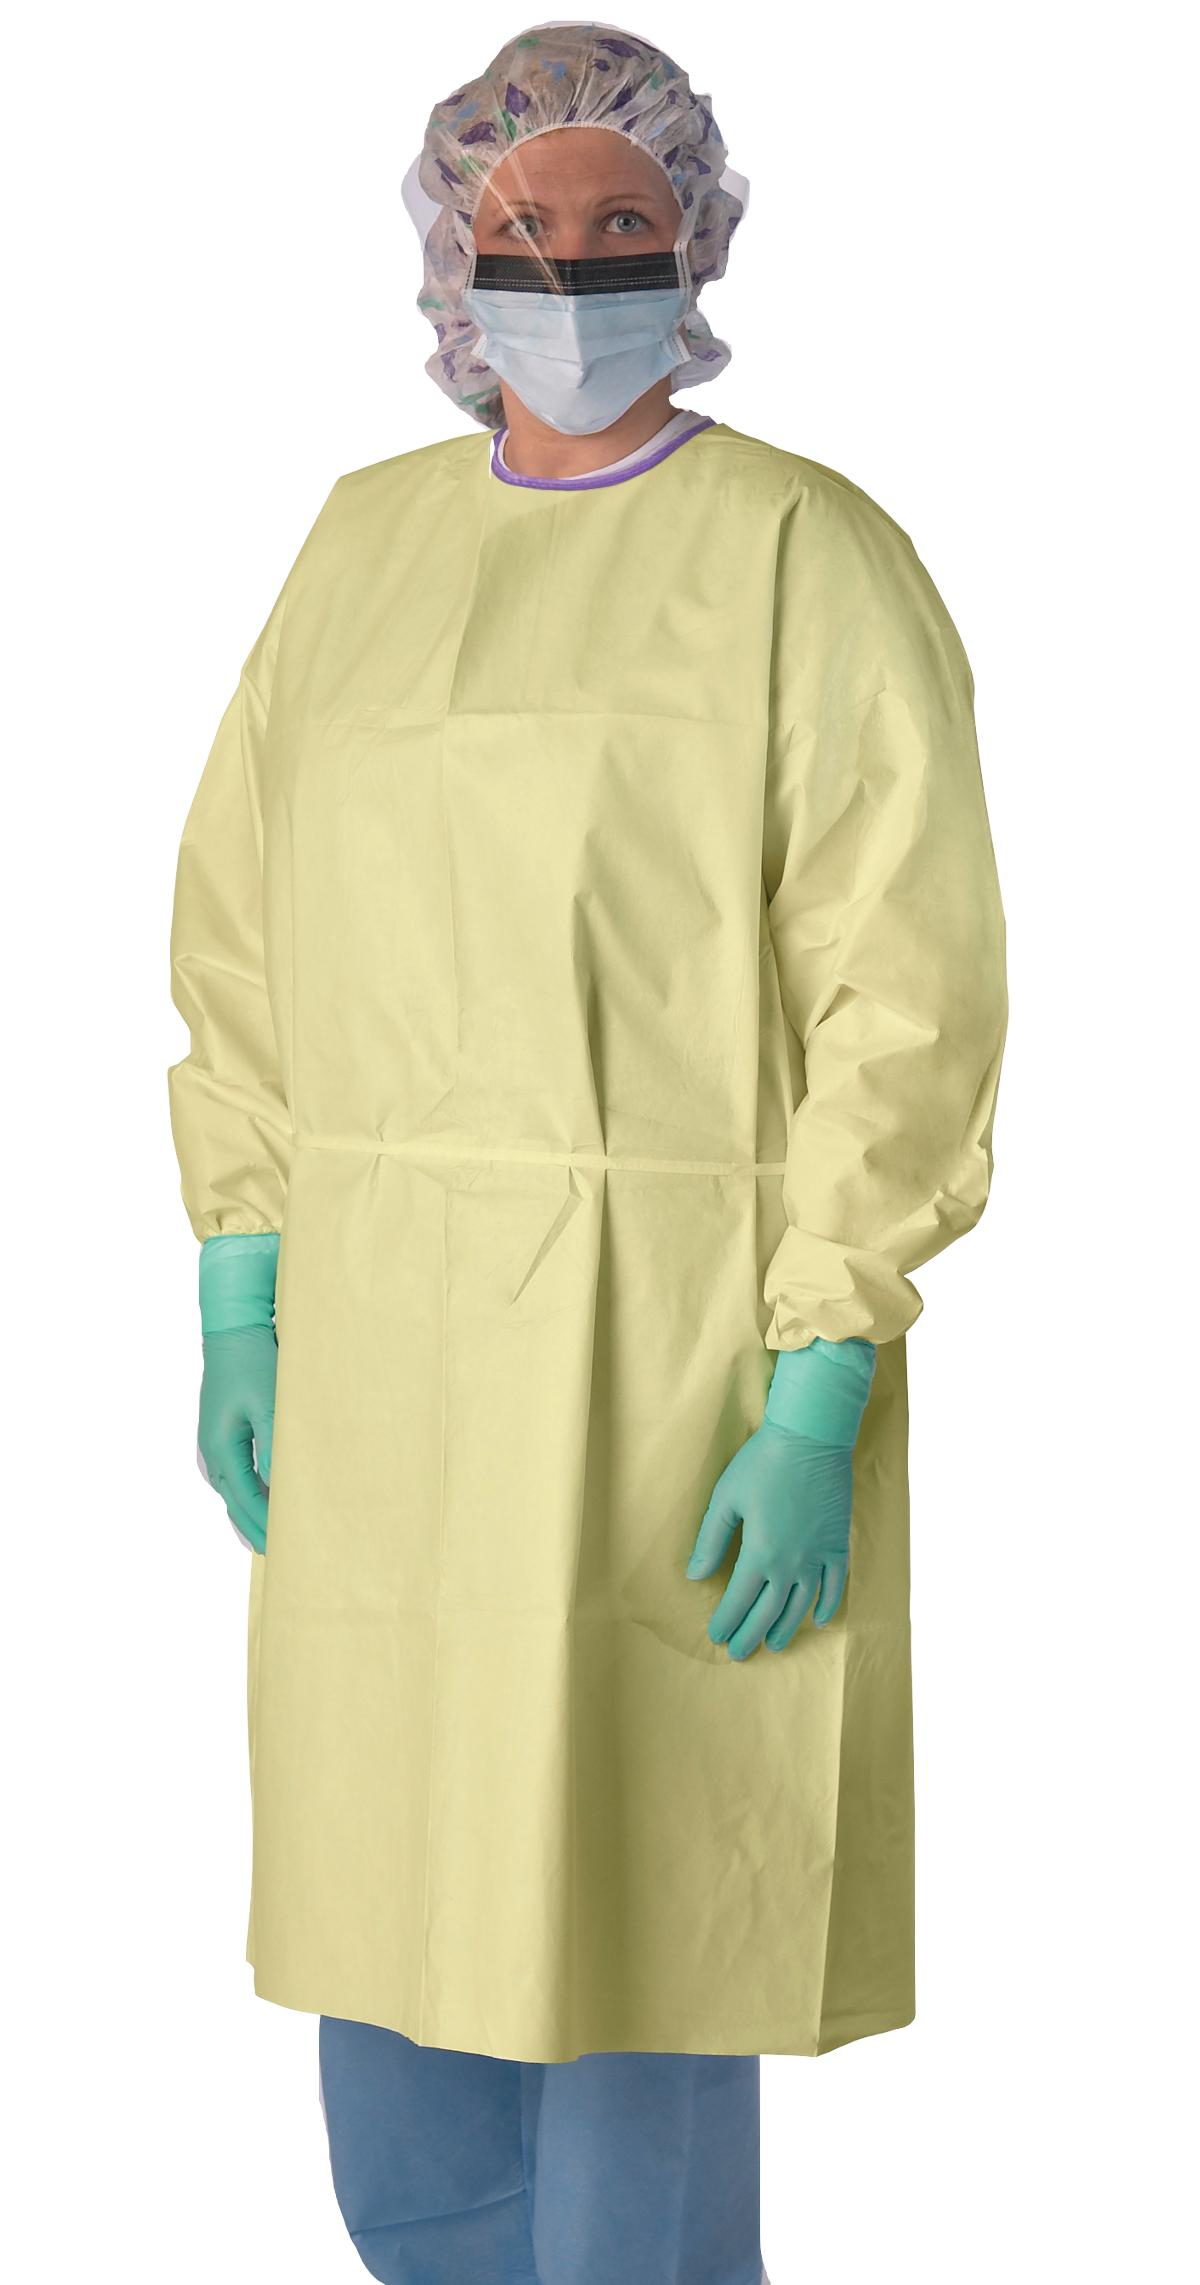 Non-Reinforced Surgical Gown with Towel McKesson Large Blue Sterile AAMI  Level 3 Disposable - drugsupplystore.com